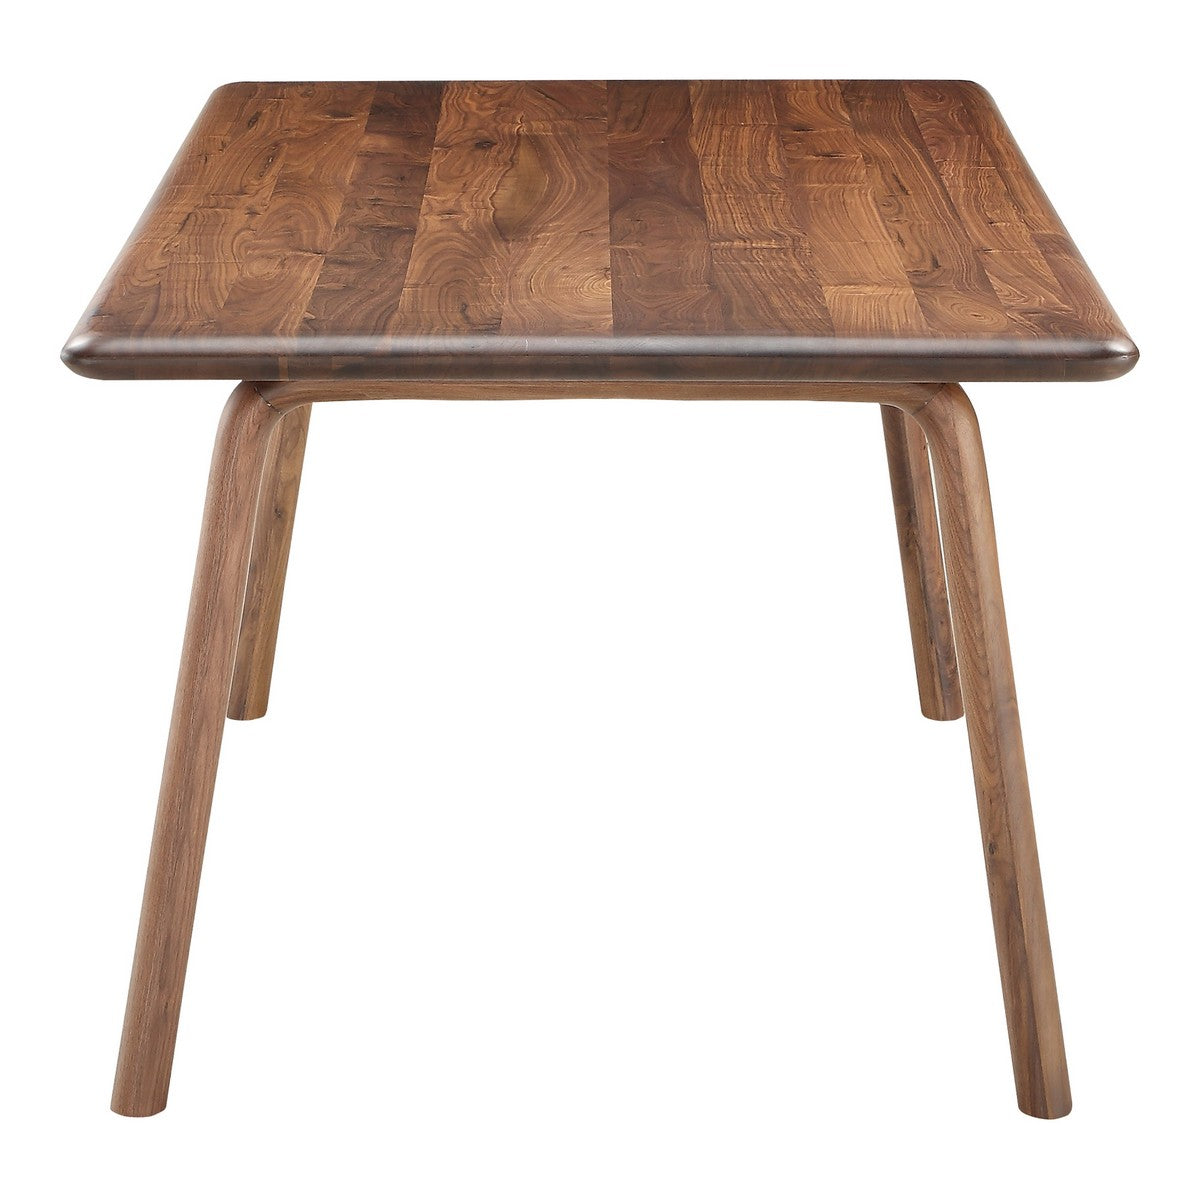 Moe's Home Collection Malibu Dining Table Walnut - BC-1046-03